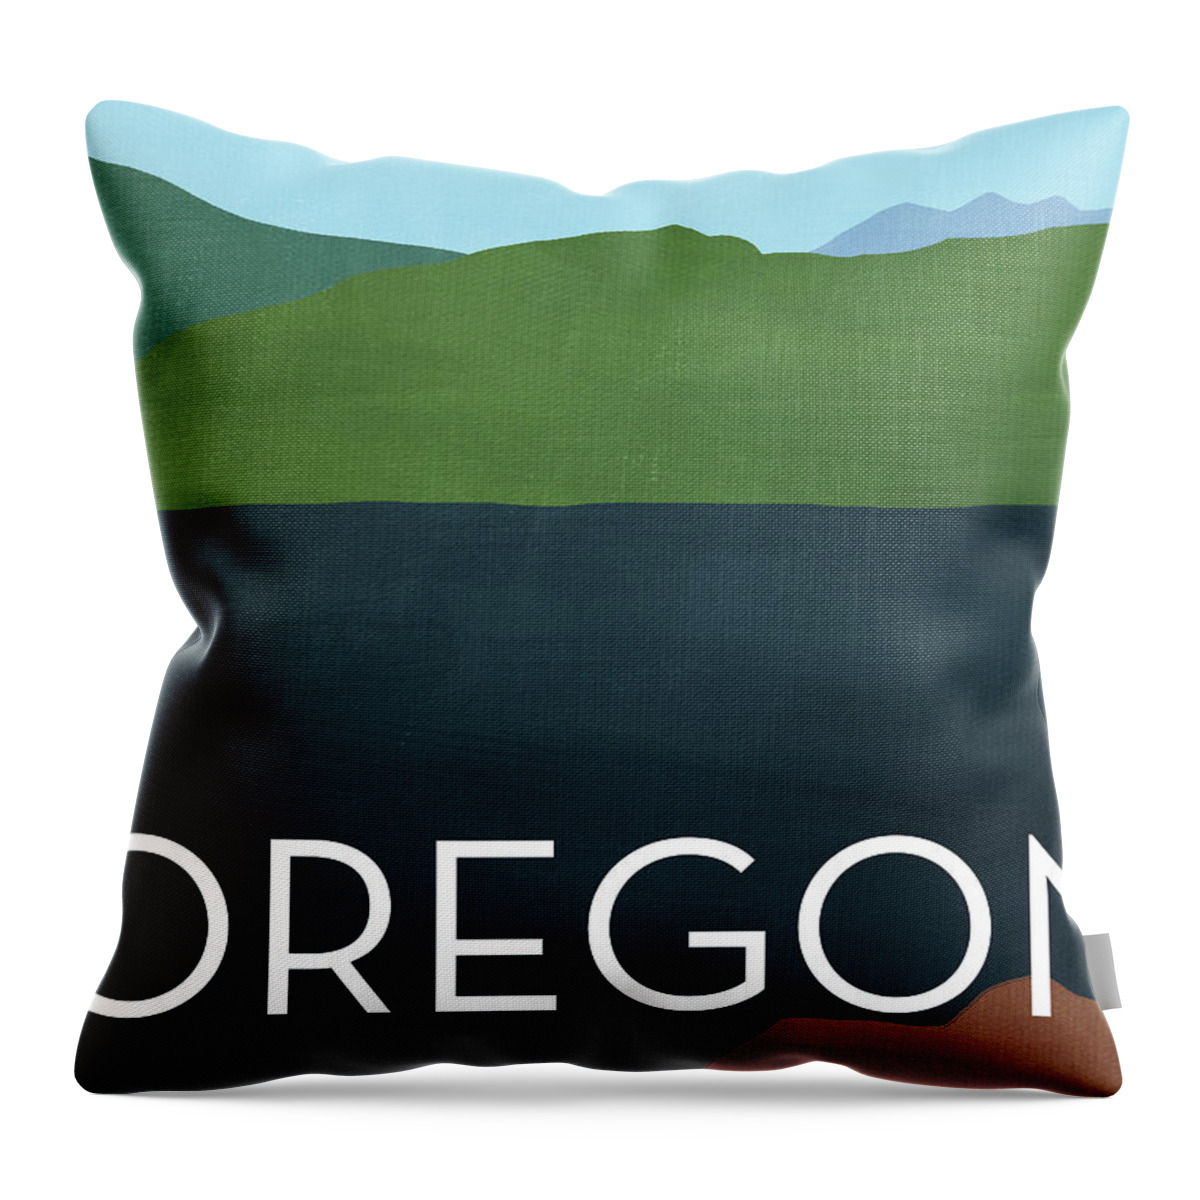 Oregon Throw Pillow featuring the mixed media Oregon Landscape- Art by Linda Woods by Linda Woods